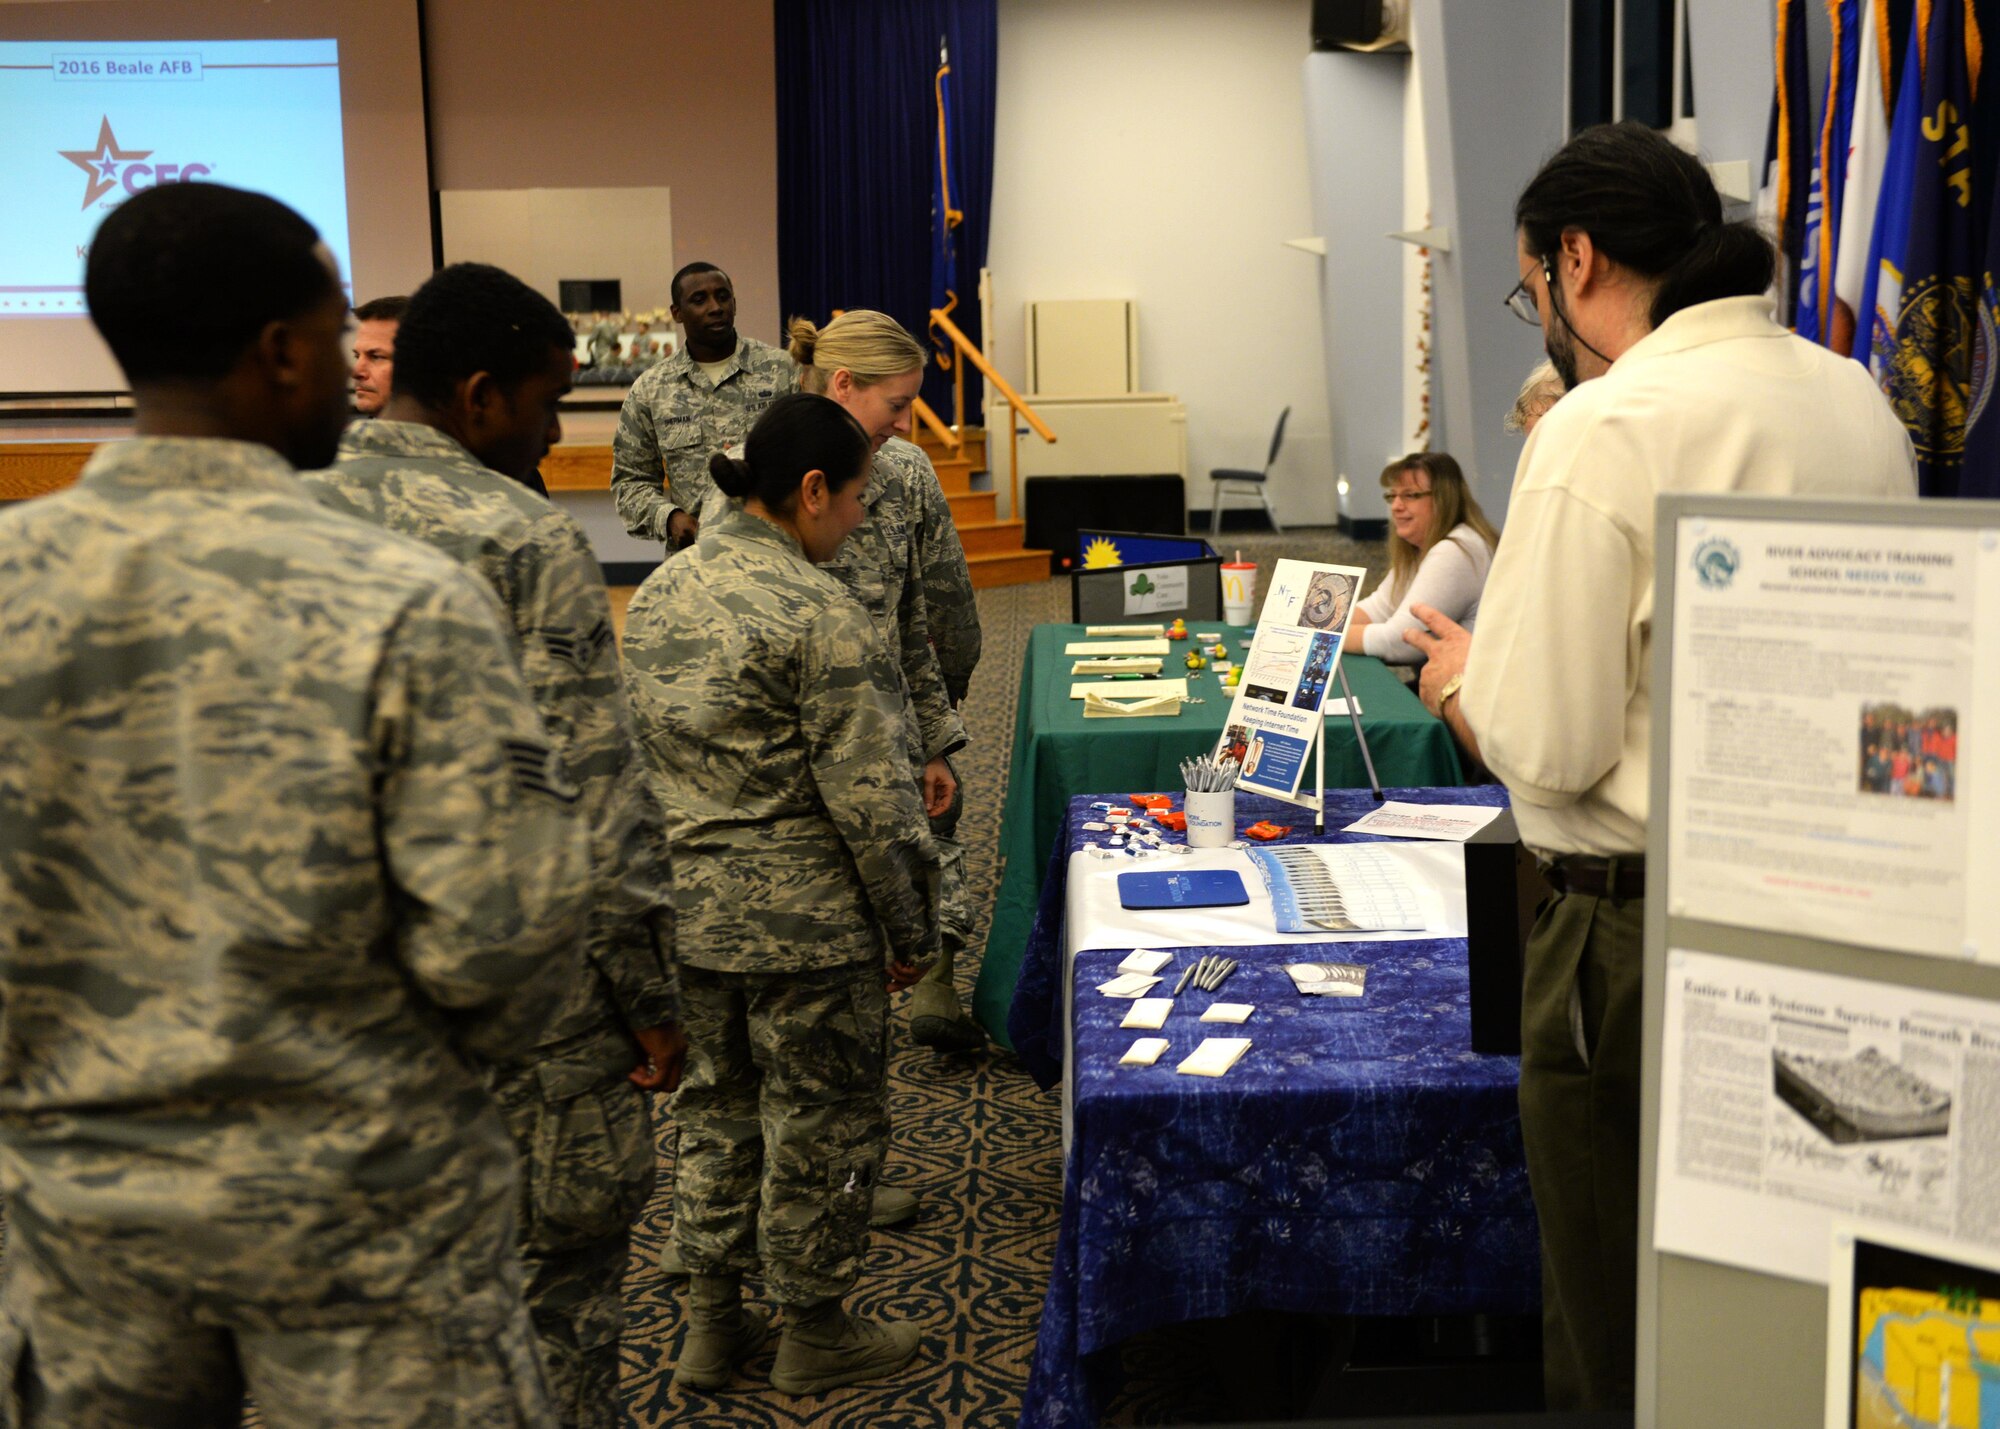 Airmen speak to representatives of local charity organizations at the Combined Federal Campaign kickoff event Nov. 7, 2016, at Beale Air Force Base, California. Since the first campaign in 1964, Federal employees have donated more than $8 billion for the charities and causes that are near and dear to them. (U.S. Air Force photo/Staff Sgt. Jeffrey Schultze)